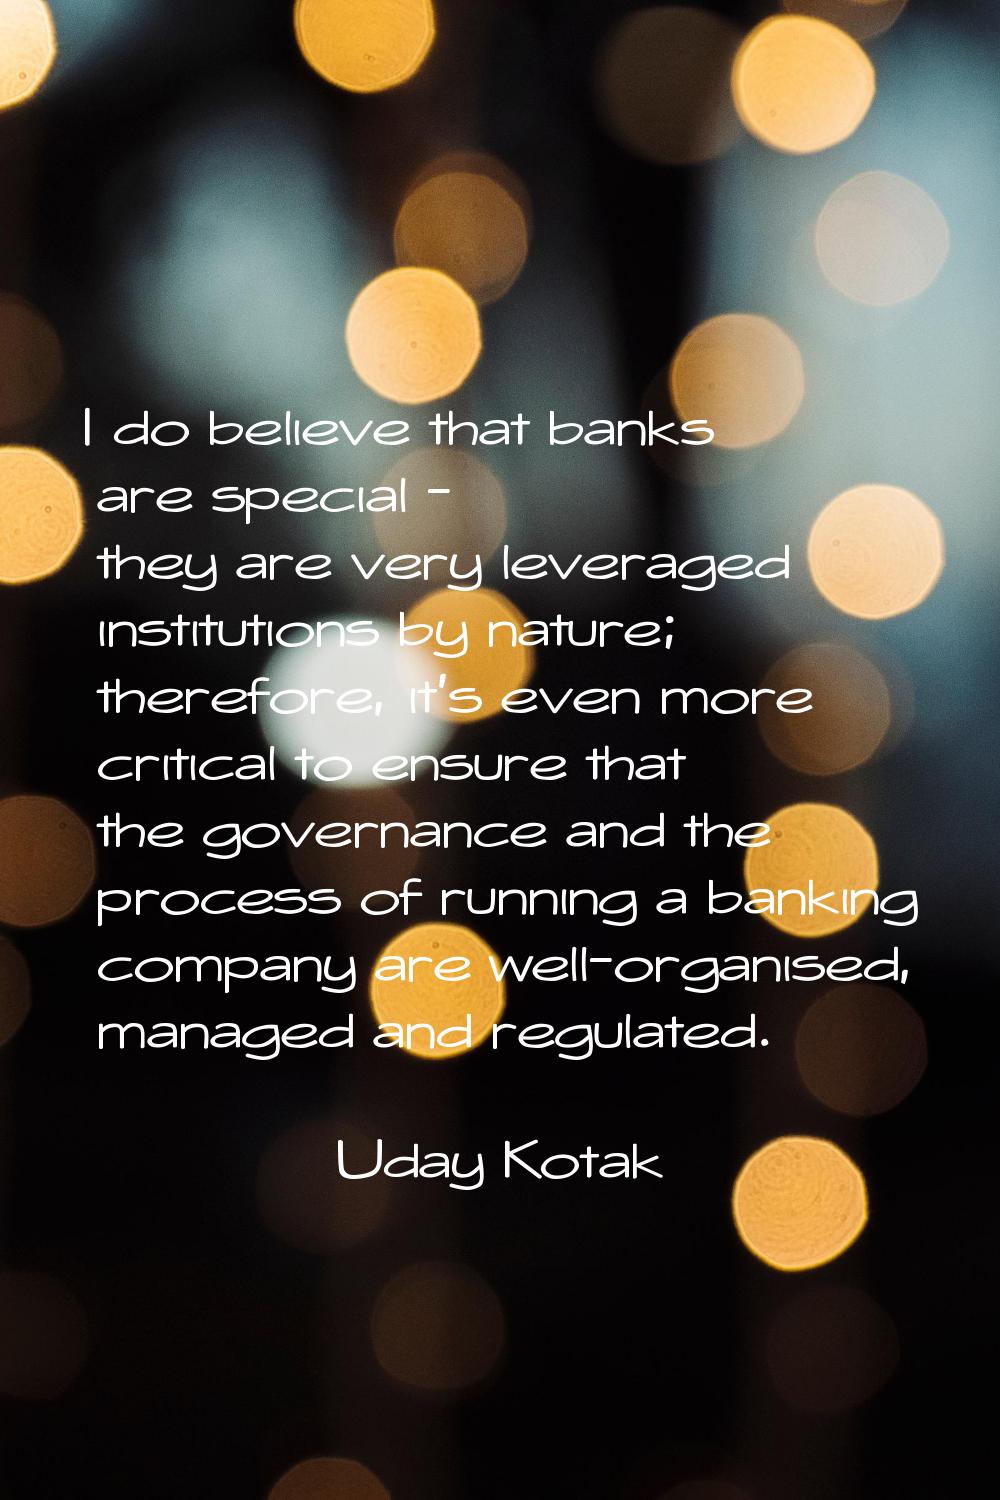 I do believe that banks are special - they are very leveraged institutions by nature; therefore, it